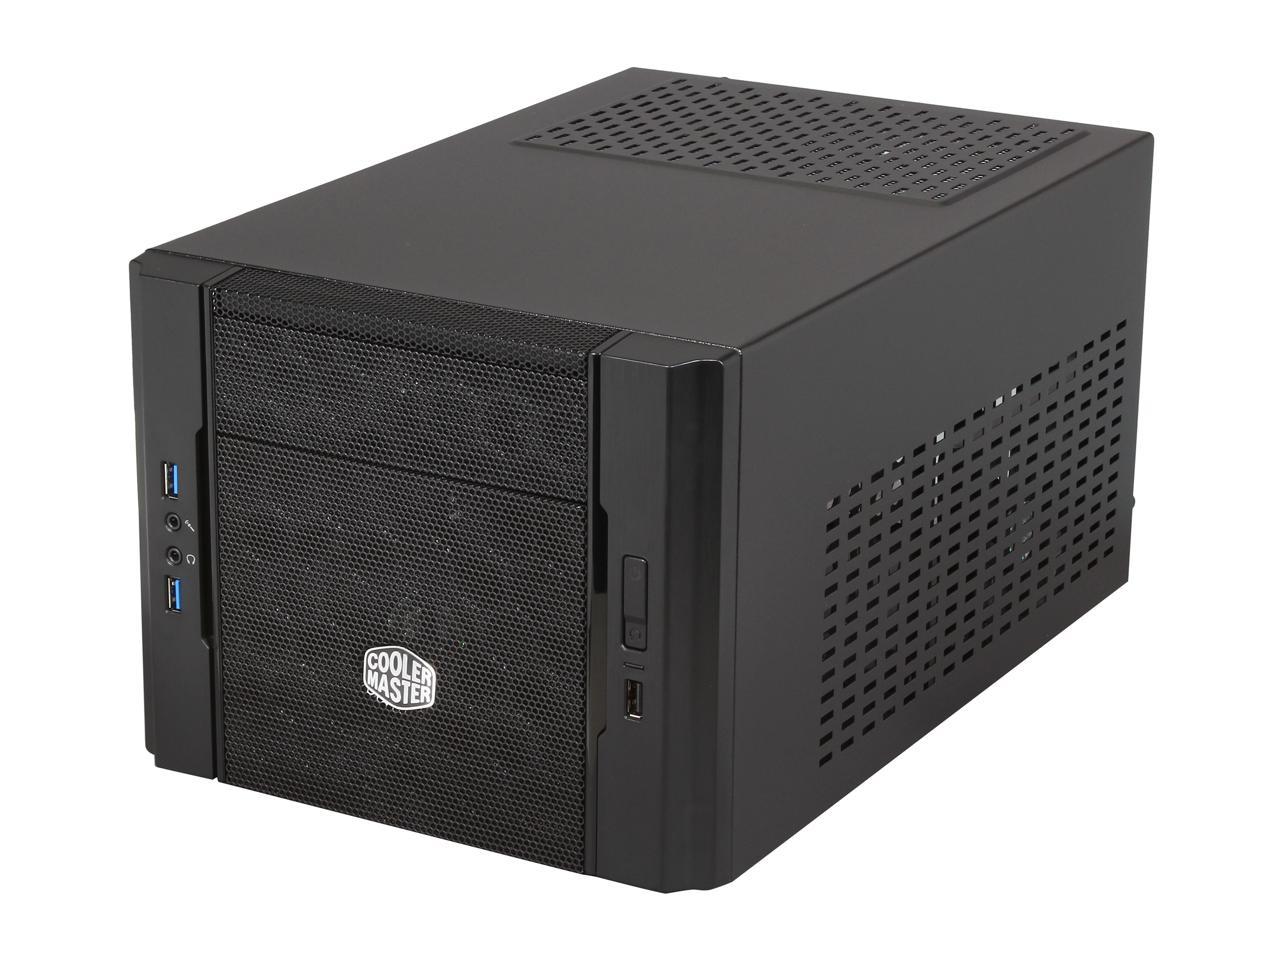 Cooler Master RC-130-KKN1 Elite 130 Mini-ITX Computer Case with Mesh Front Panel and Water Cooling Support 